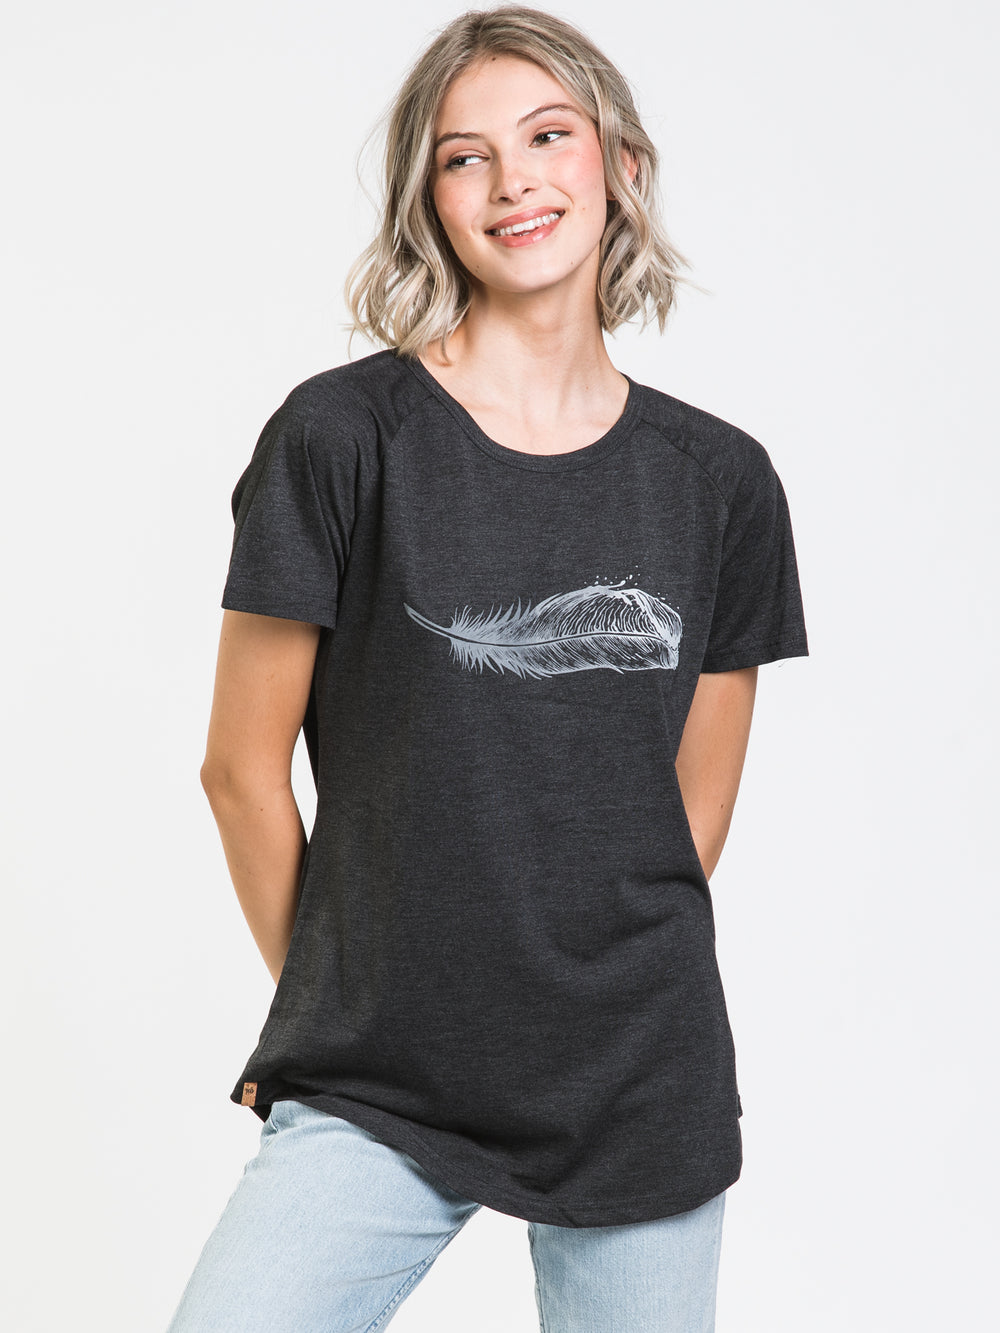 TENTREE FEATHERWEAVE LOGO T-SHIRT - CLEARANCE